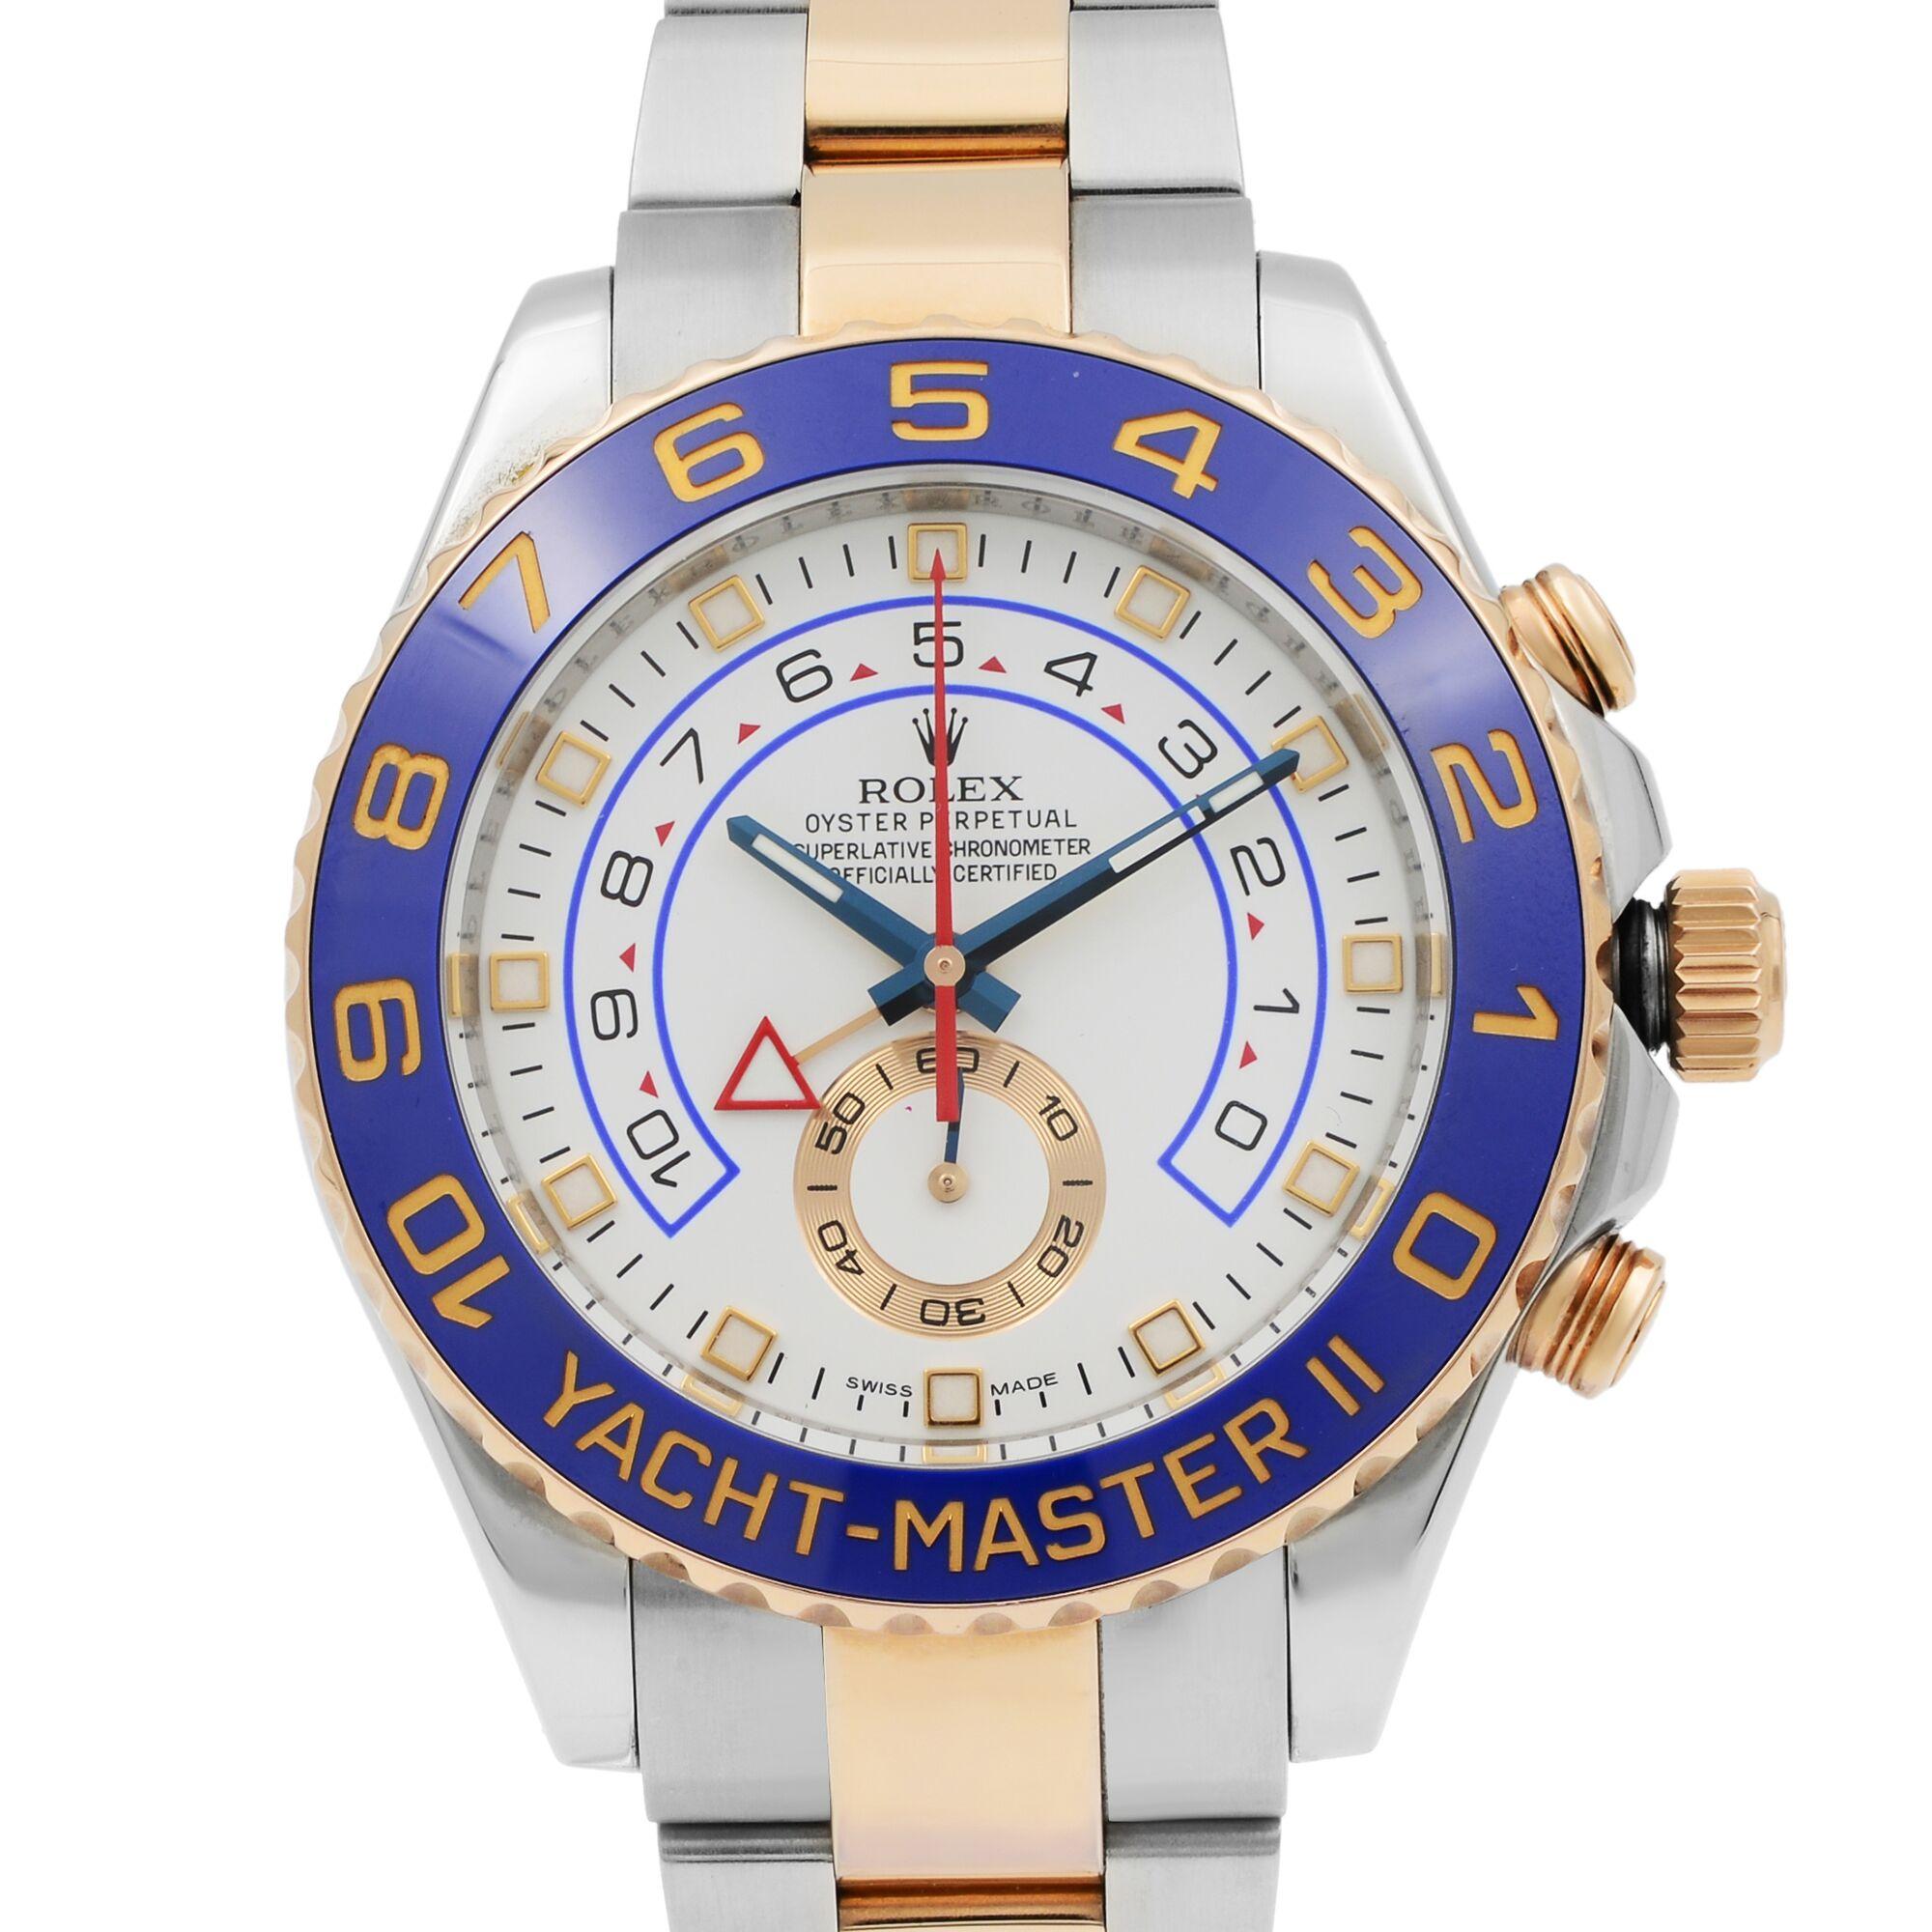 This pre-owned Rolex Yacht-Master II 116681 is a beautiful men's timepiece that is powered by mechanical (automatic) movement which is cased in a stainless steel case. It has a round shape face, chronograph, chronograph hand, small seconds subdial